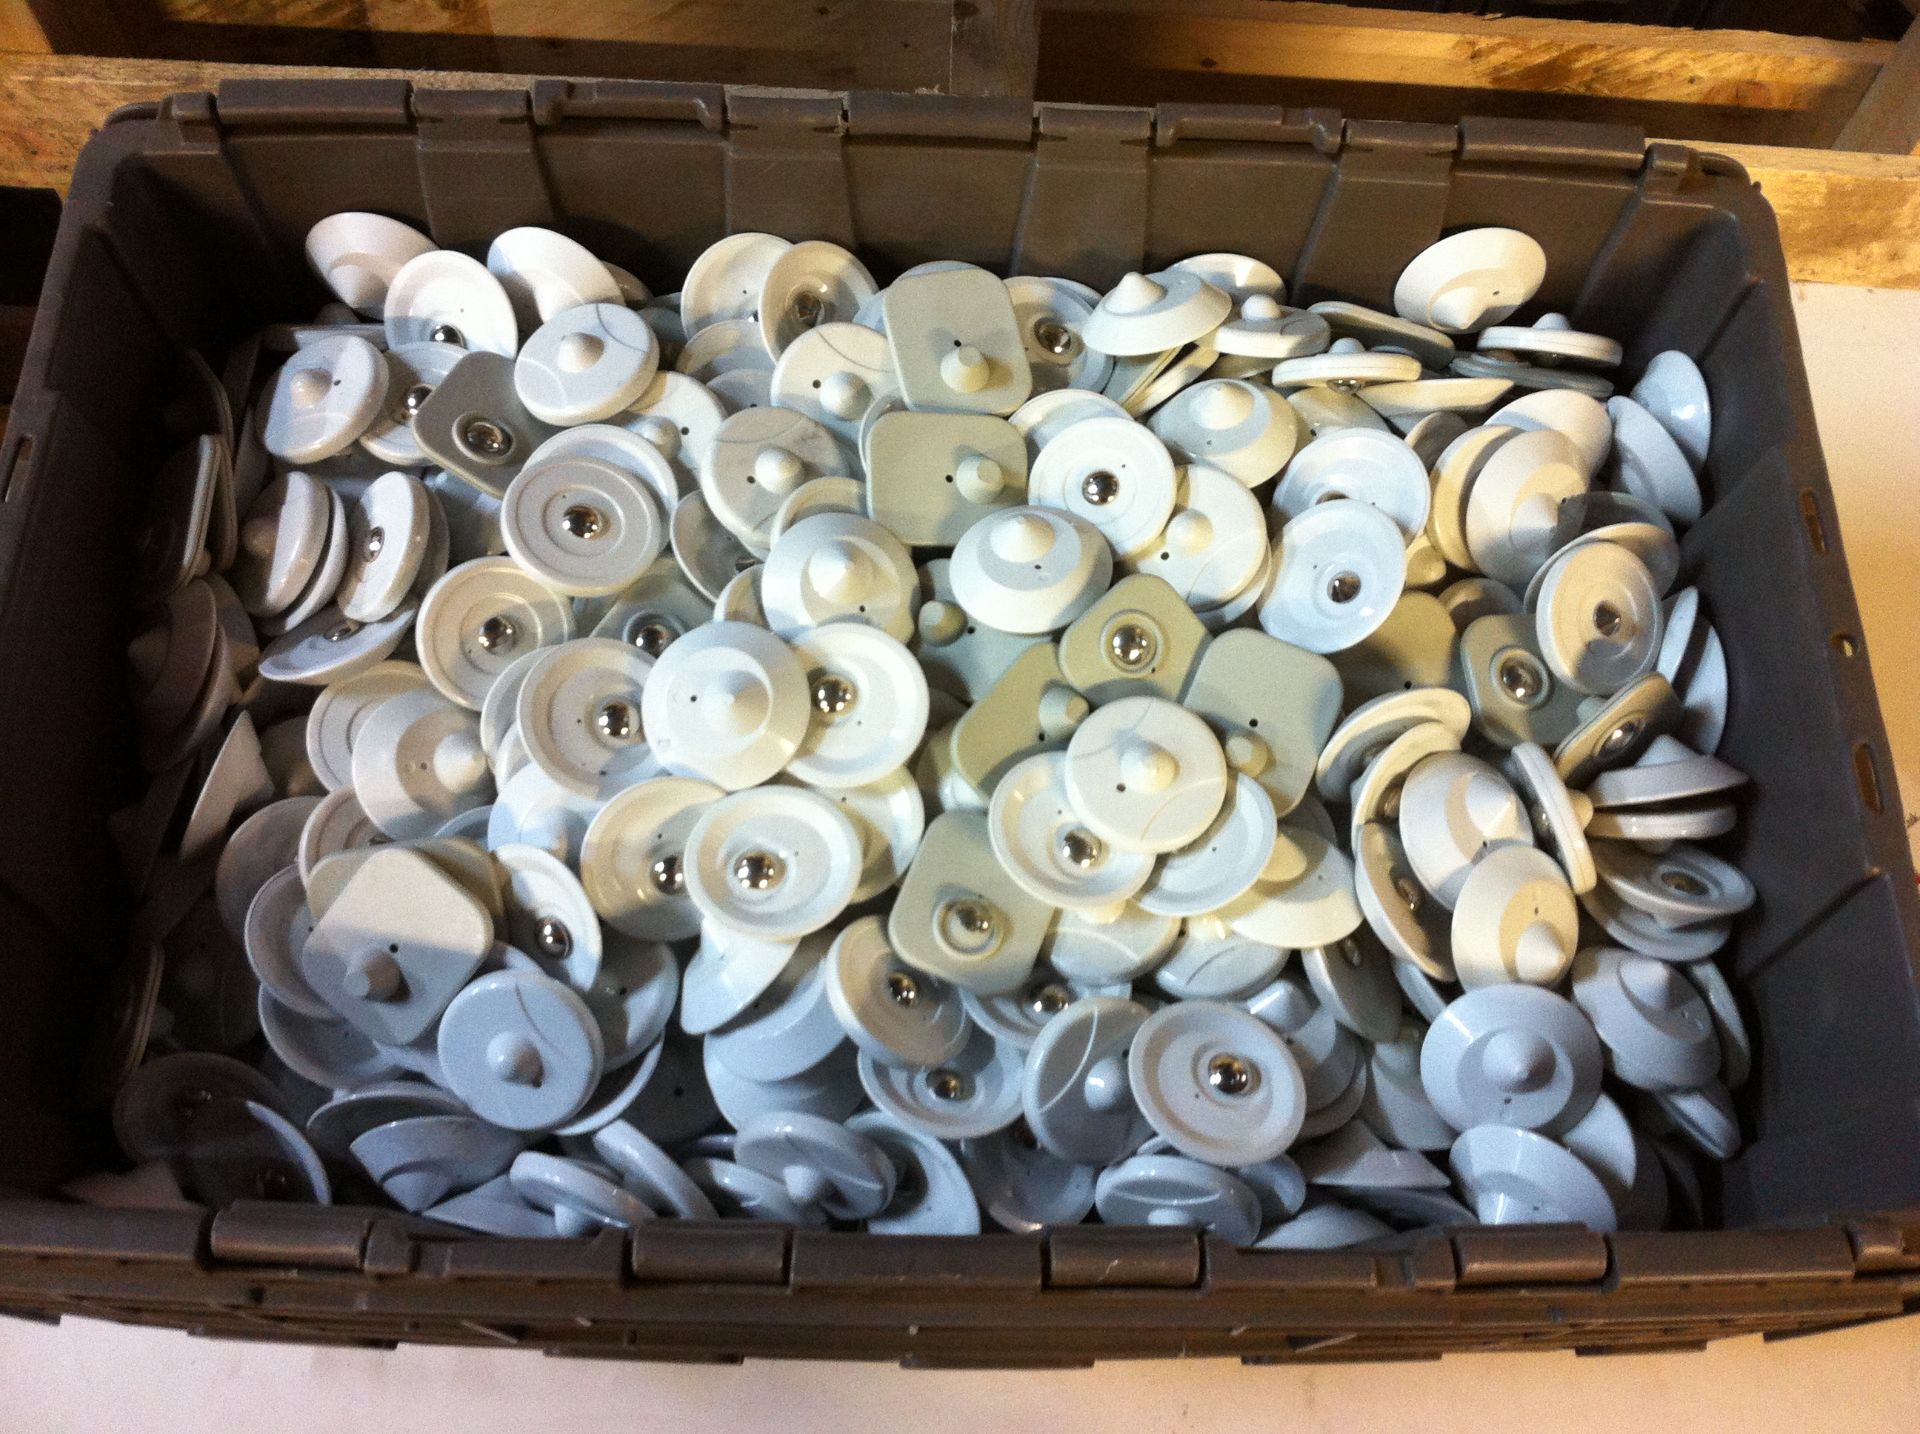 Quantity of Security Tags for Clothing and 1 Box of Shelf Clips